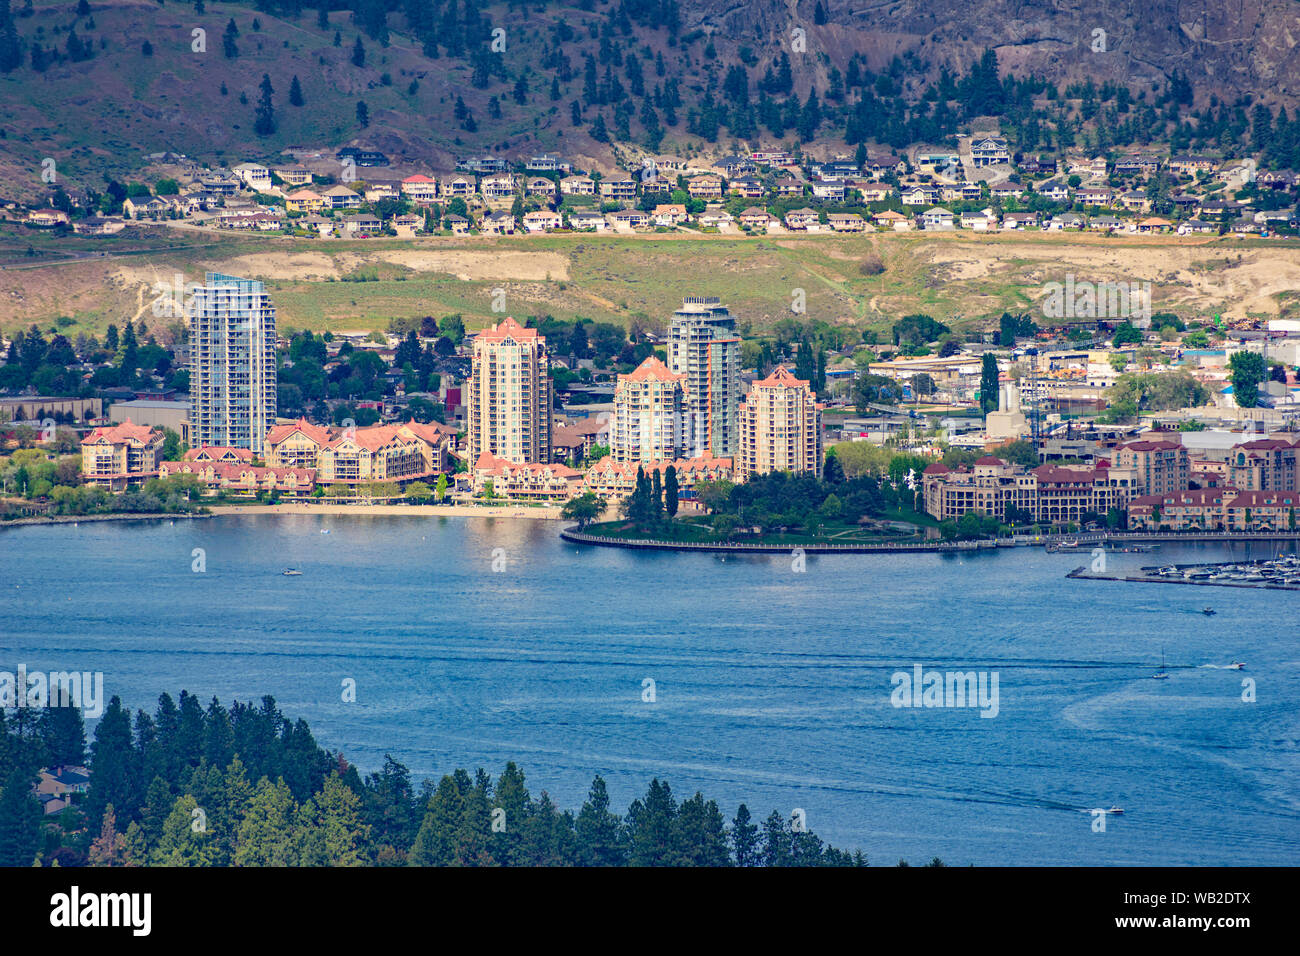 A view of the Kelowna Skyline and Okanagan Lake from Mount Boucherie in West Kelowna British Columbia Canada in the summer Stock Photo